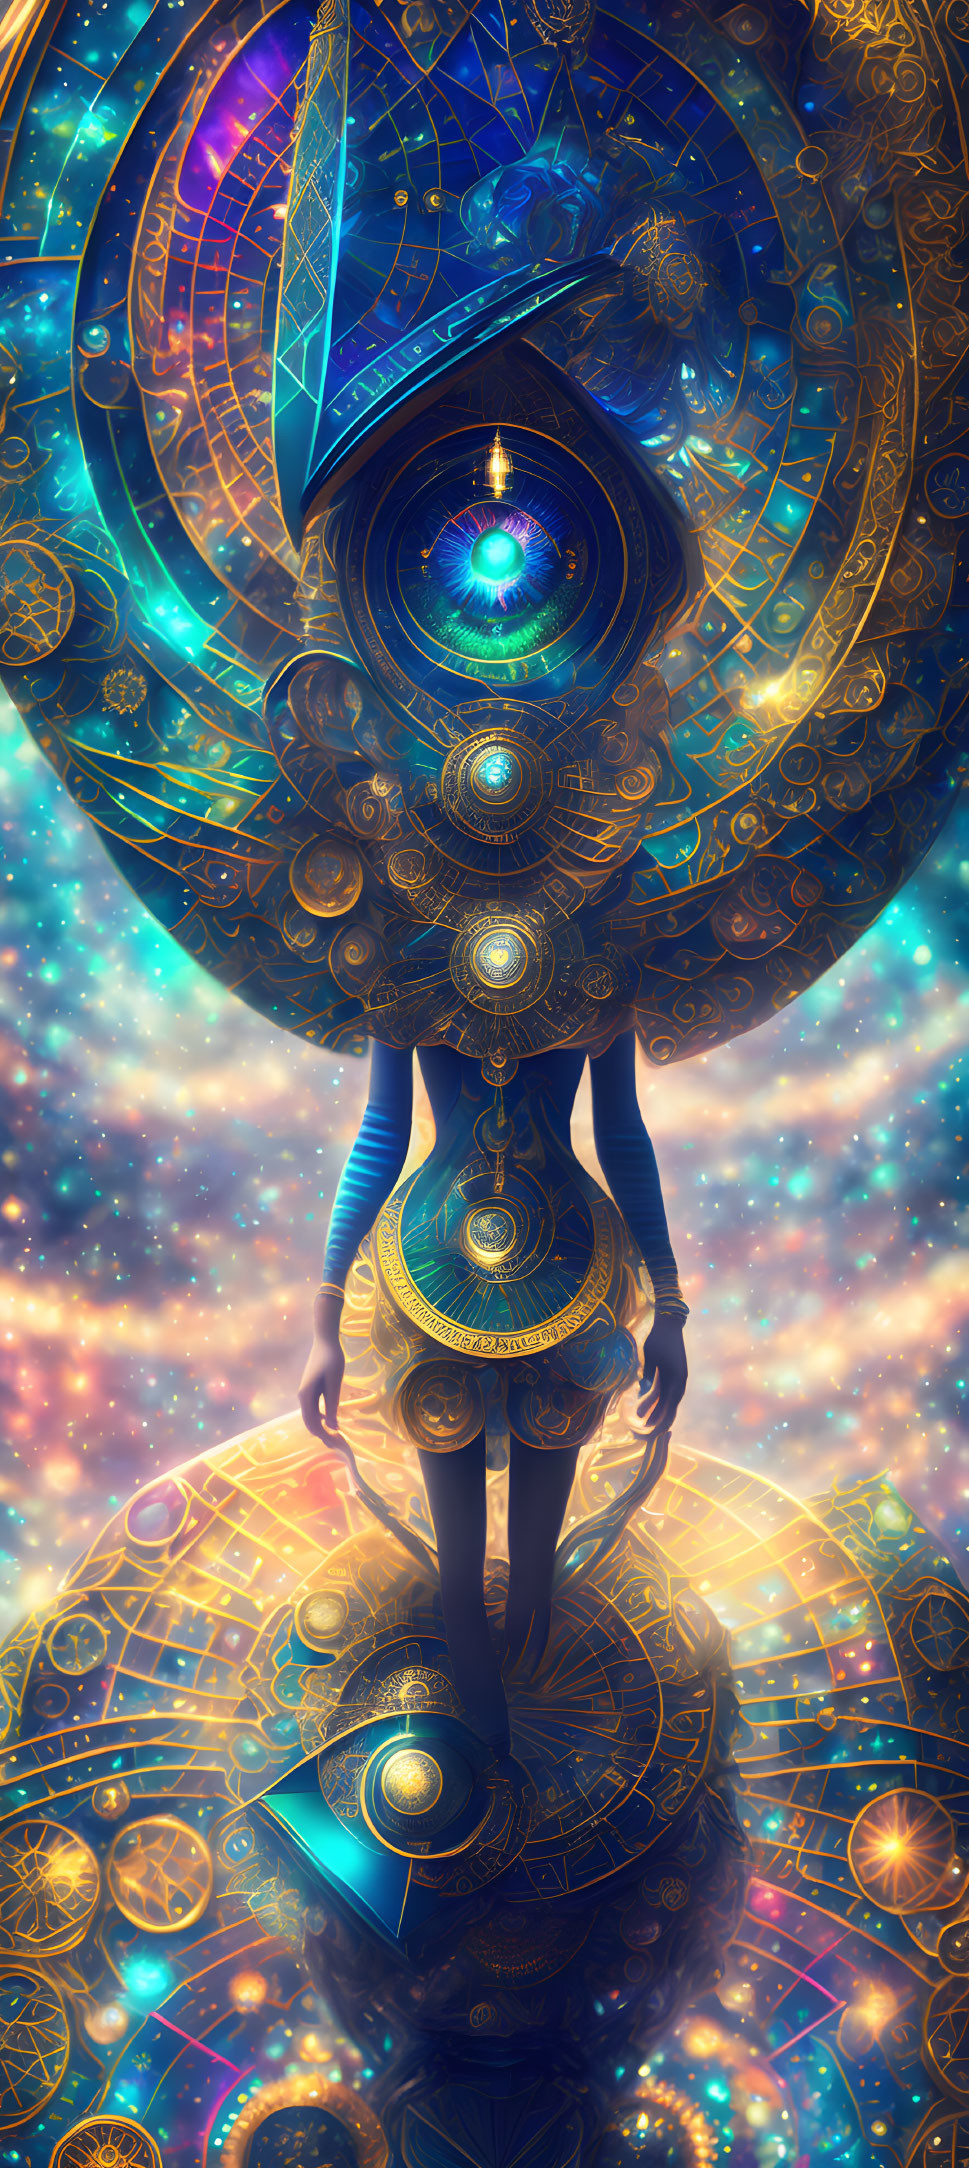 Person in cosmic patterns with celestial symbols and universe-inspired aura headpiece